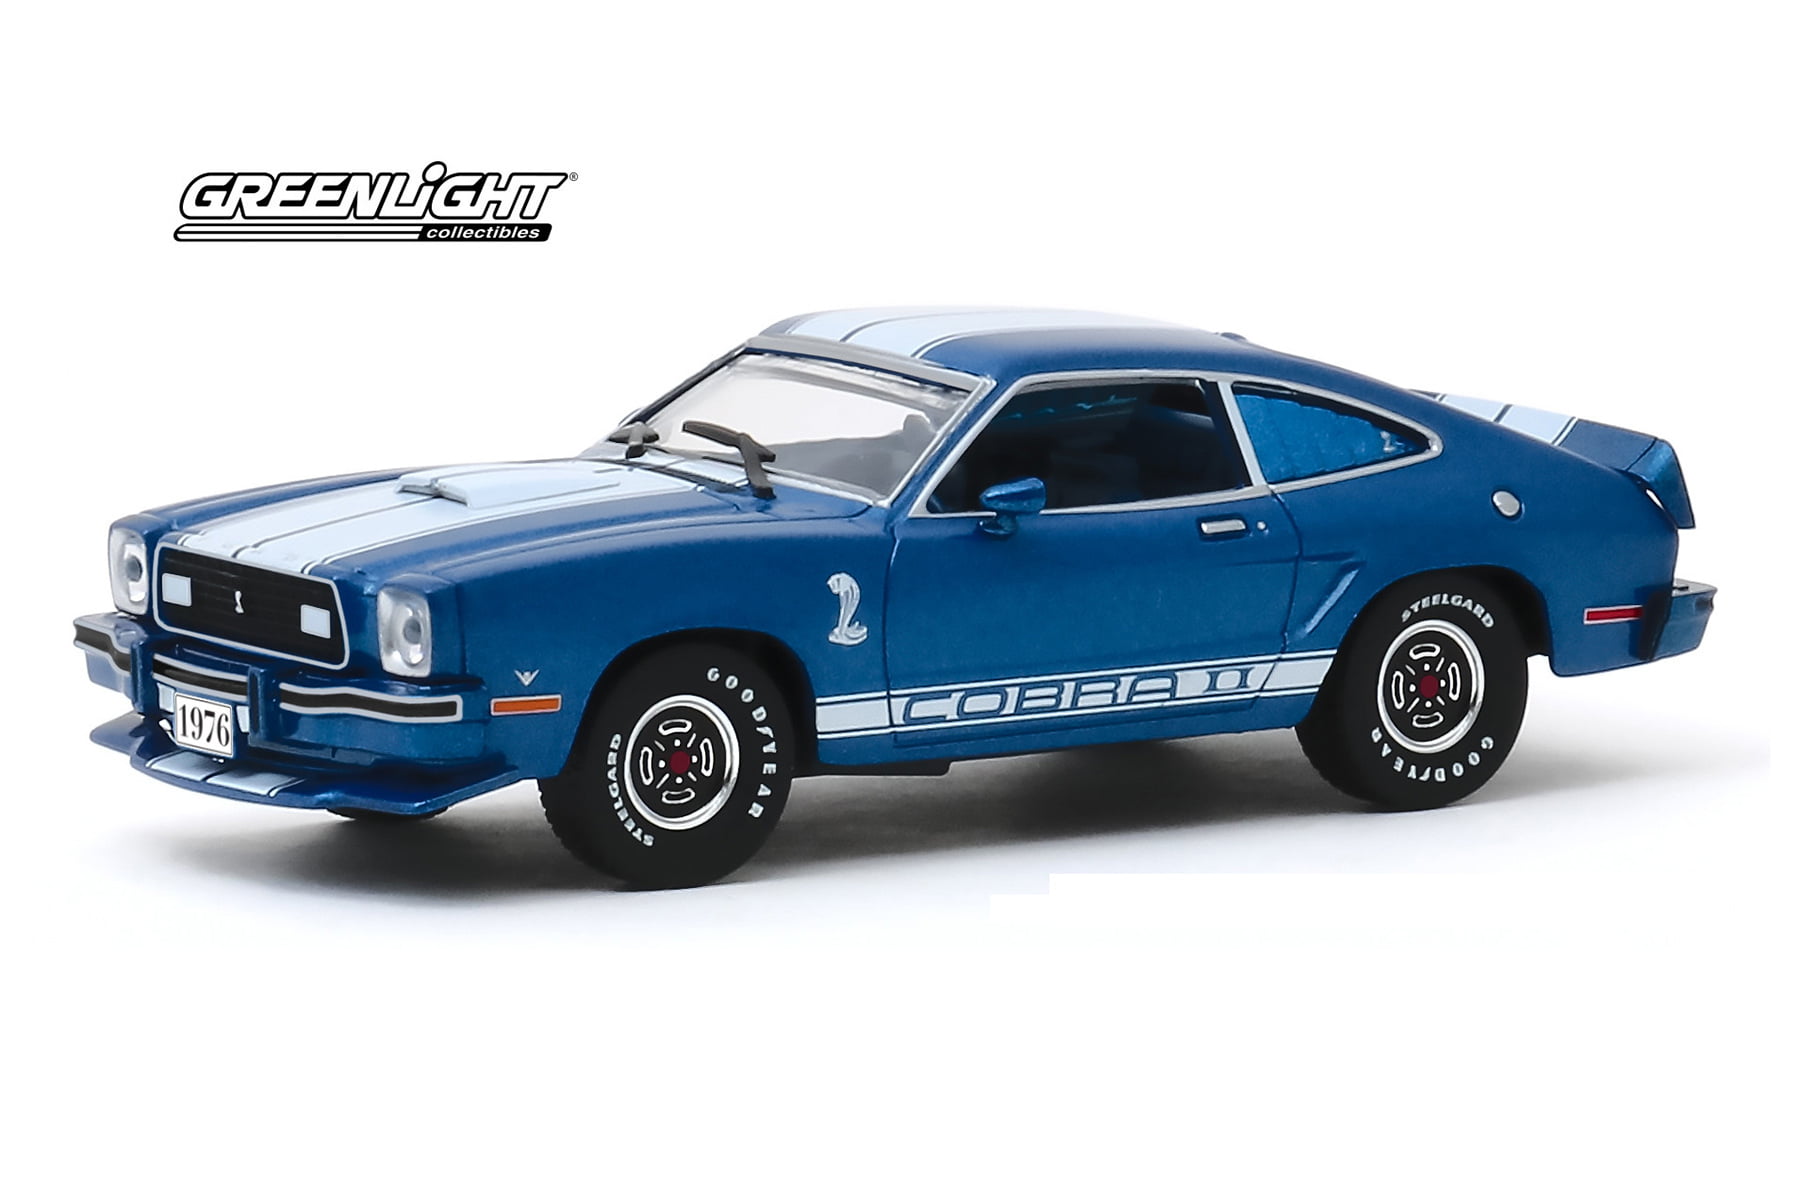 Greenlight1:43 1978 Ford Mustang II Cobra II Blue with WhiteIN STOCK 